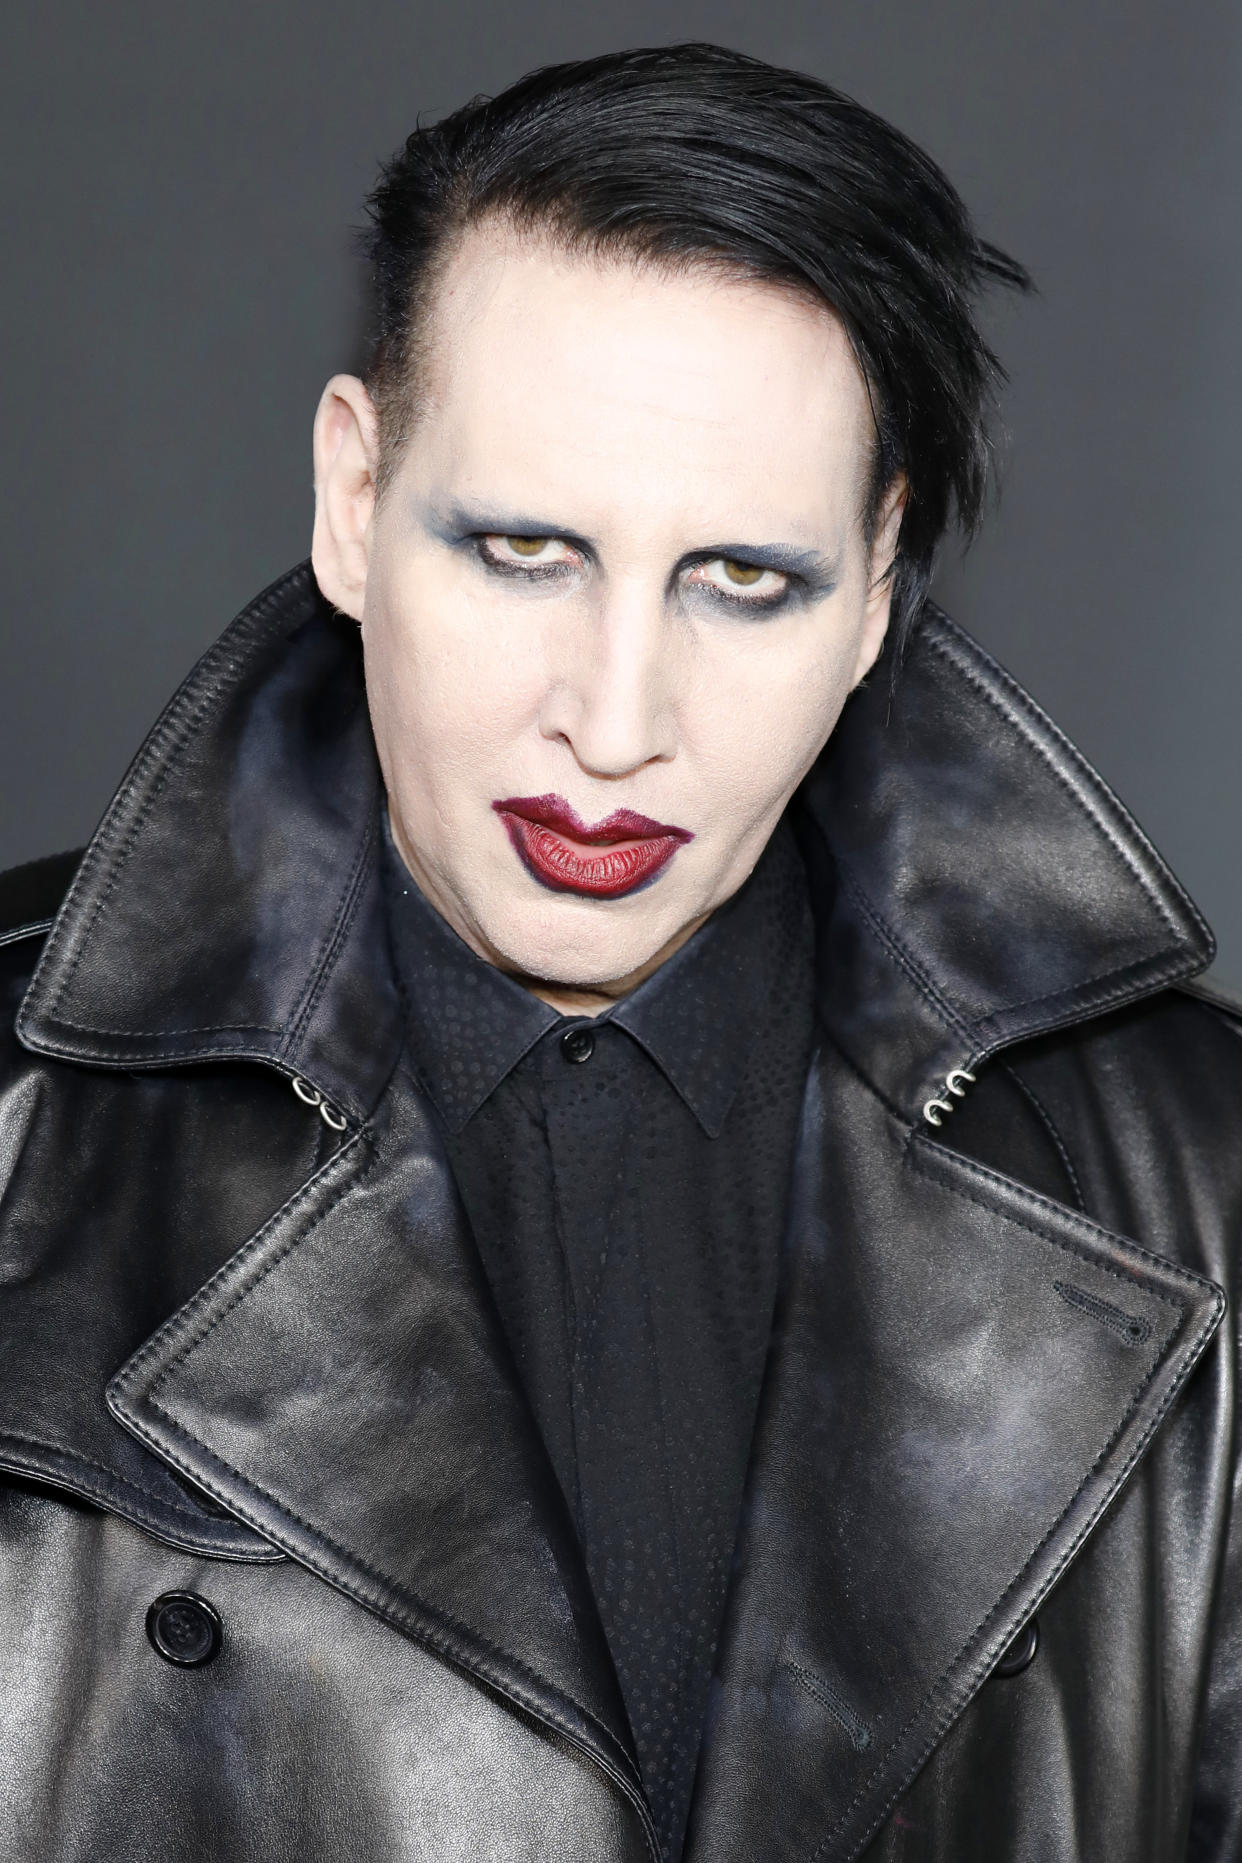 LOS ANGELES, CALIFORNIA - JANUARY 4: (EDITORS NOTE: Image has been digitally retouched) Marilyn Manson arrives at 'The Art Of Elysium's 13th Annual Celebration - Heaven' at Hollywood Palladium on January 04, 2020 in Los Angeles, California.  (Photo by Kurt Krieger - Corbis/Corbis via Getty Images)